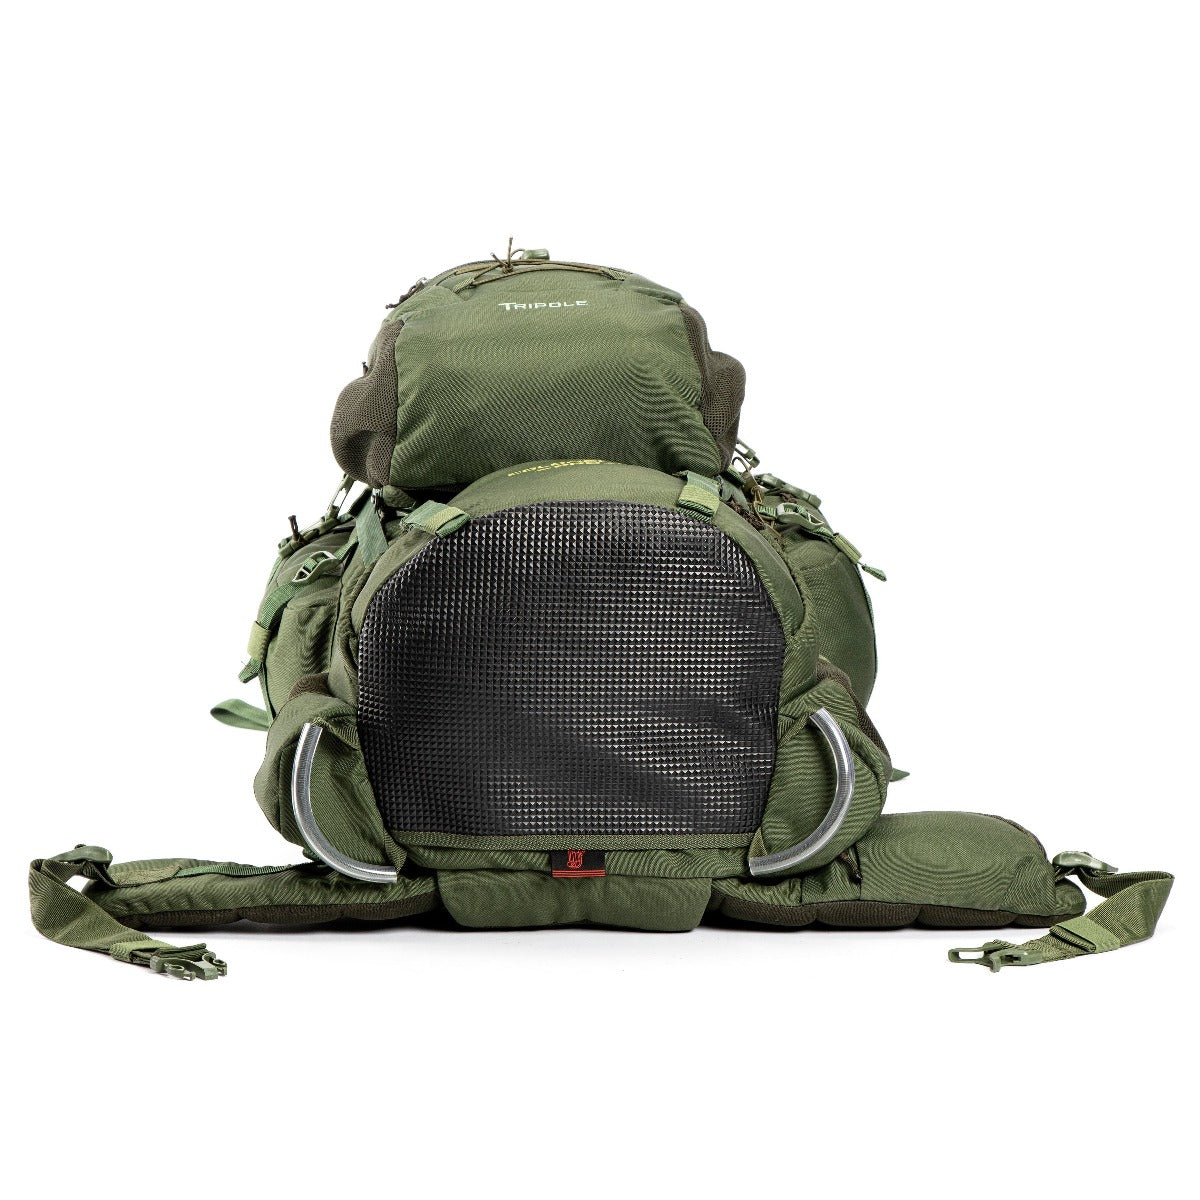 Colonel Pro Metal Frame Rucksack + Detachable Bag & Rain Cover - 90 Litres - Army Green 4